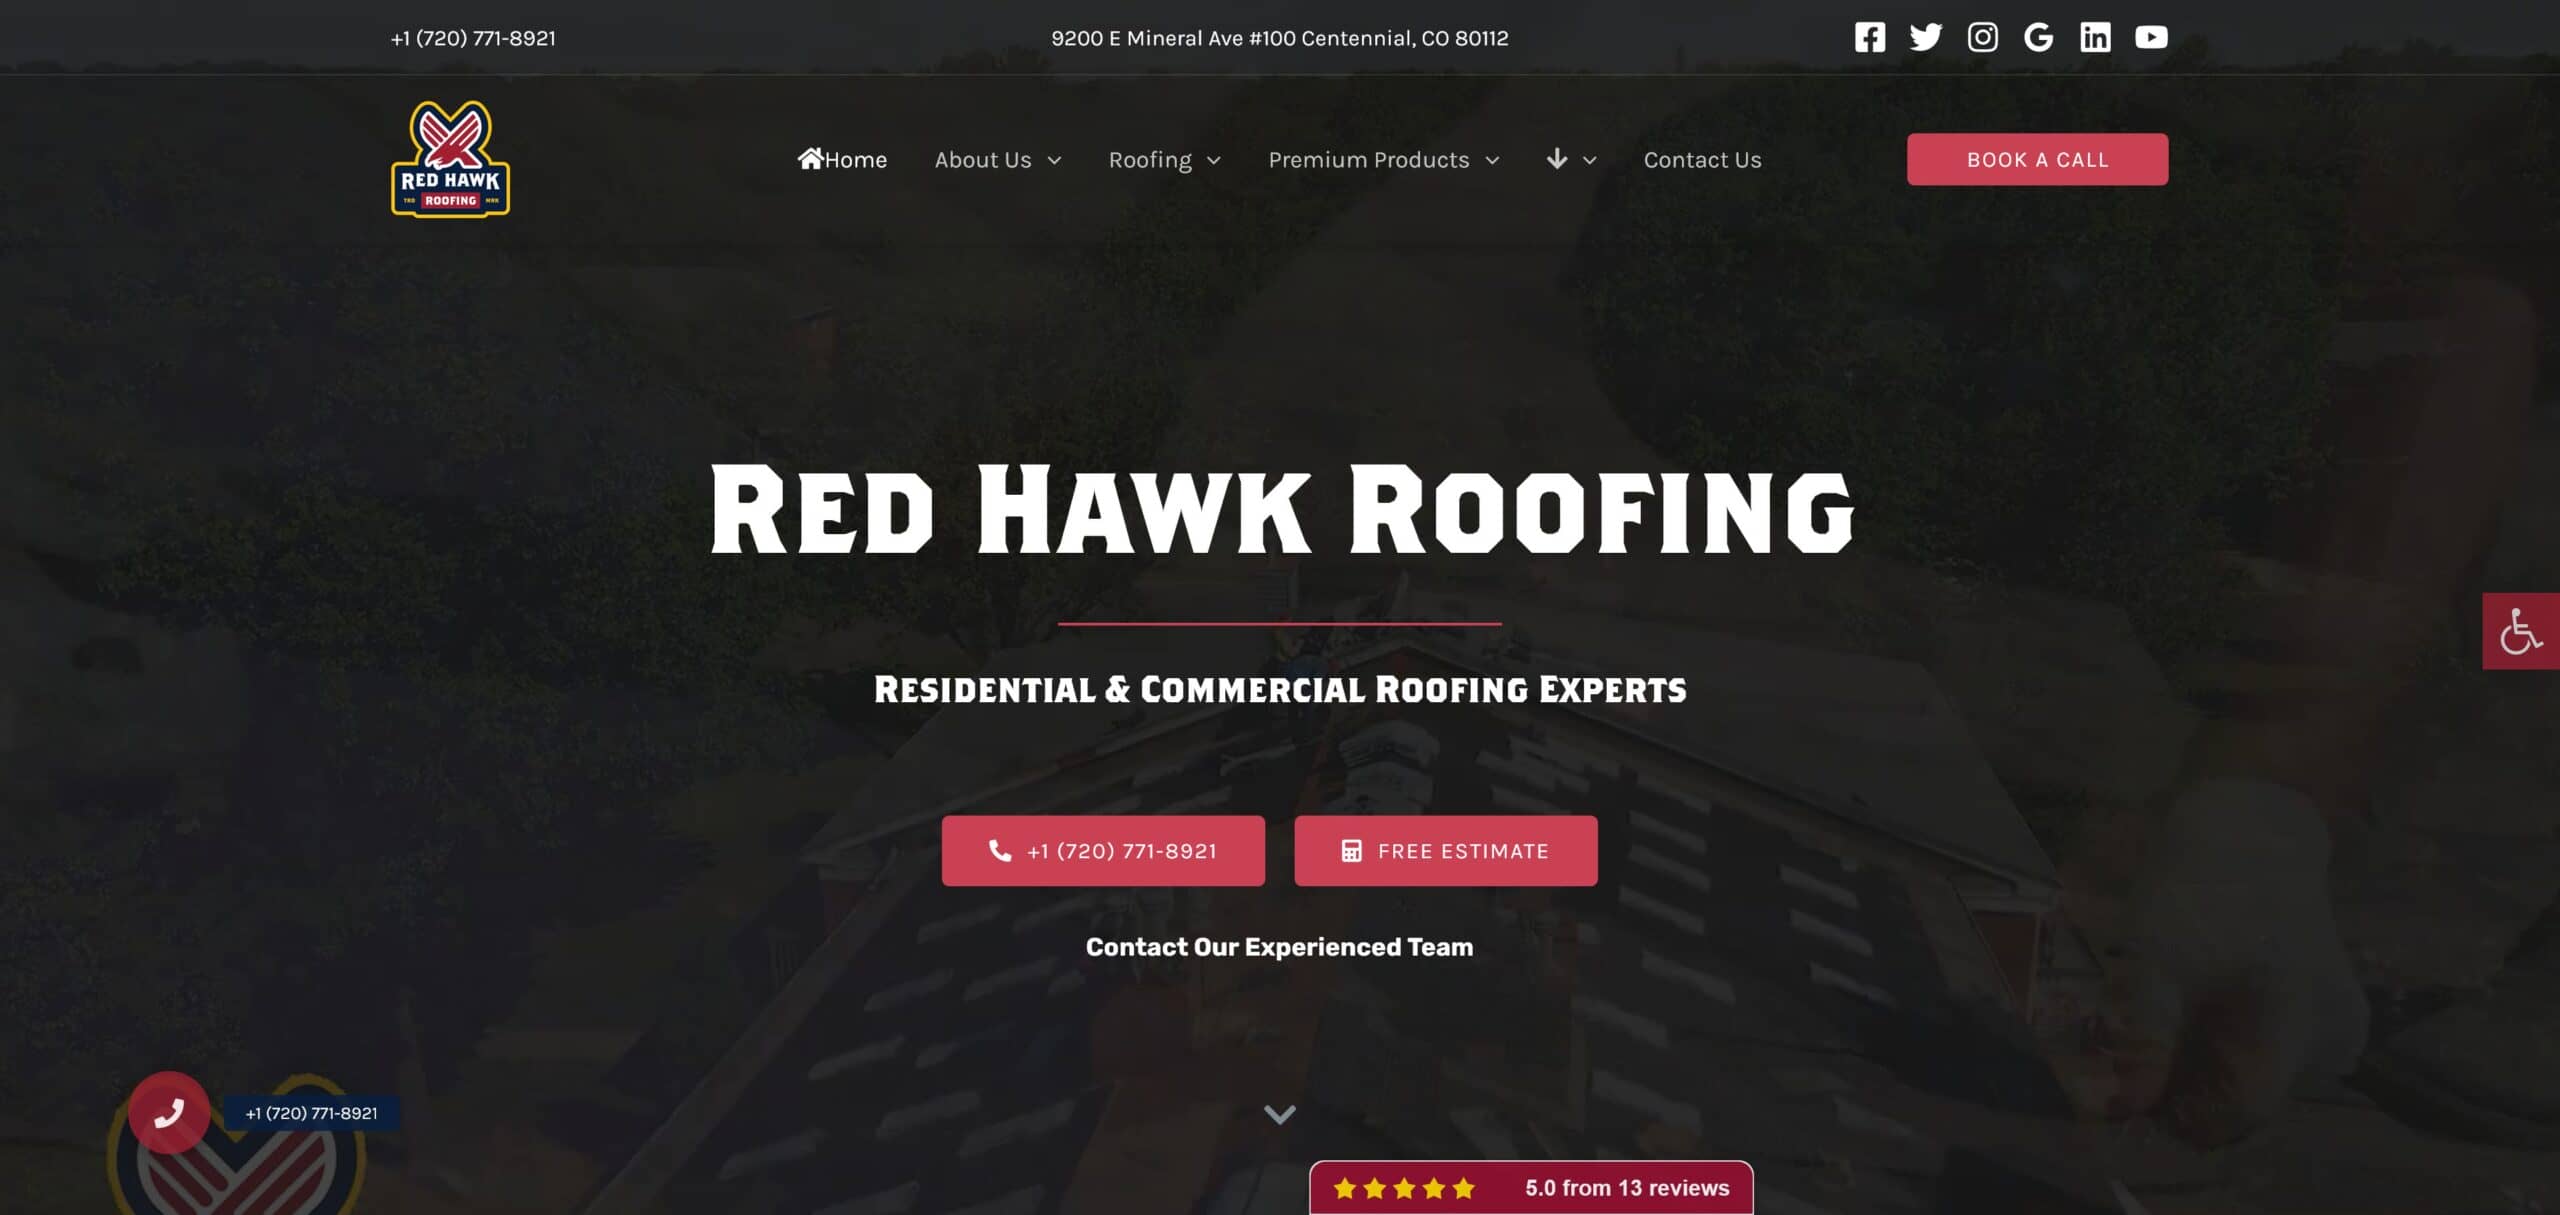 Red hawk roofing screenshot 1 scaled - tyler hall tech | website design & development services | fort collins, co | experienced professionals | full stack developer